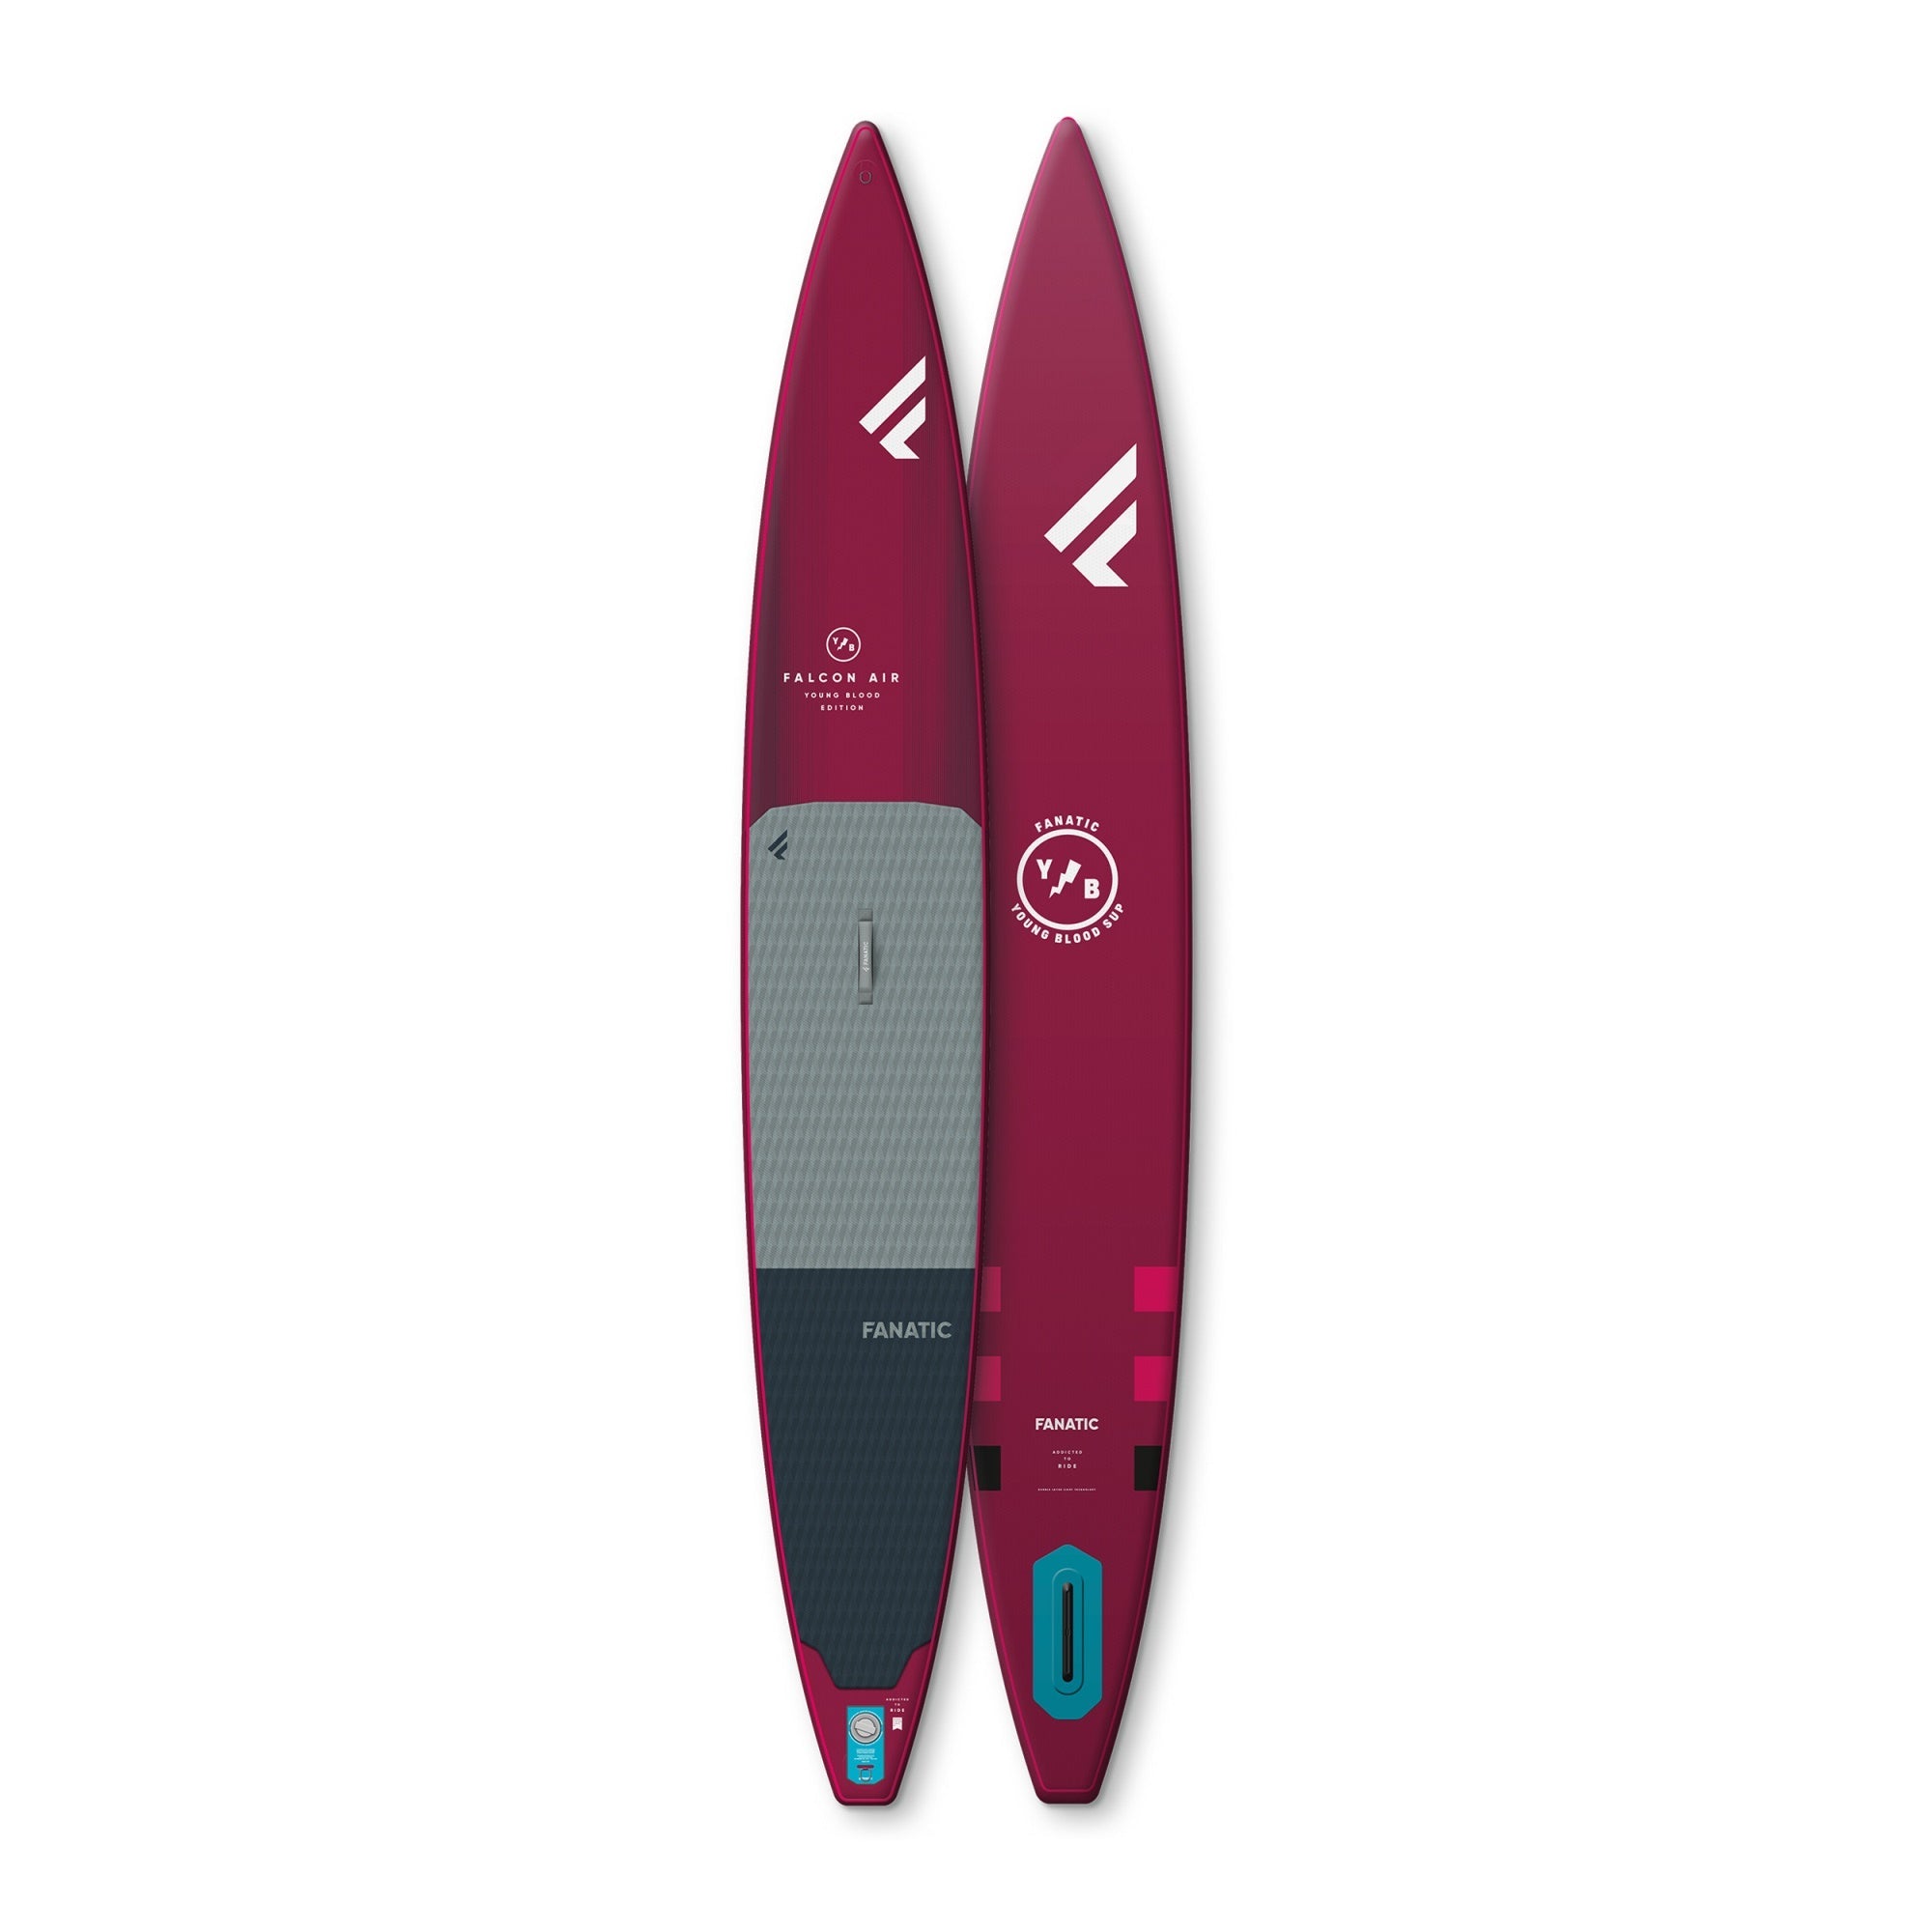 Fanatic Falcon Air Young Blood Edition 2022 - Worthing Watersports - 9010583127866 - SUP Inflatables - Fanatic SUP